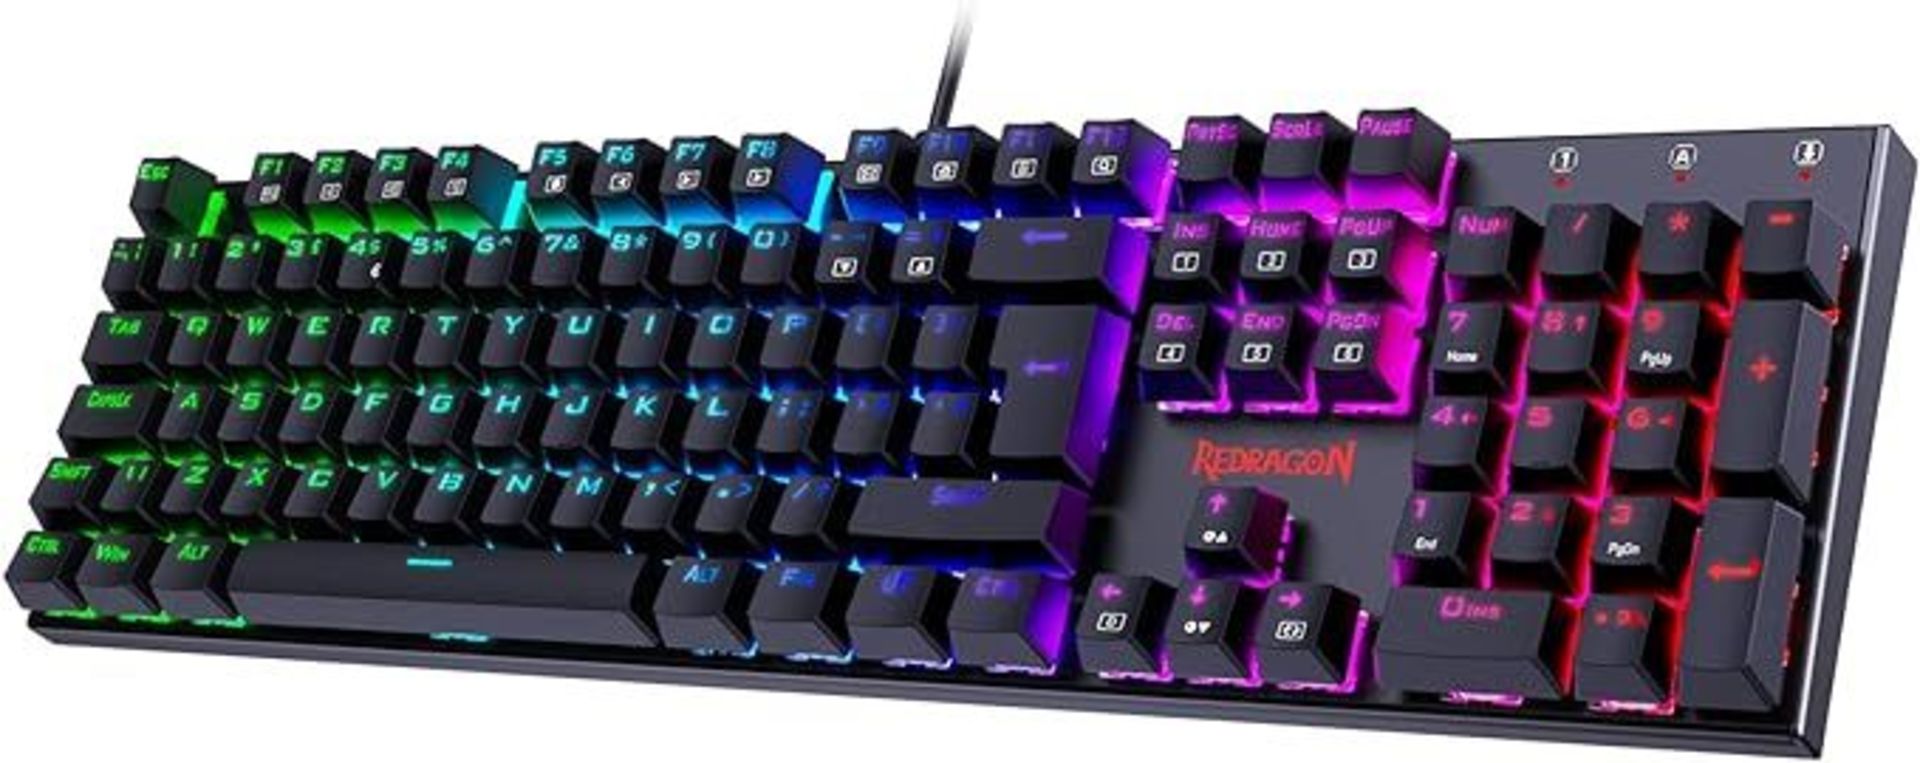 Chillblast Imperium Mechanical Gaming Keyboard, Redragon Mechanical Keyboard with 105 Programmable